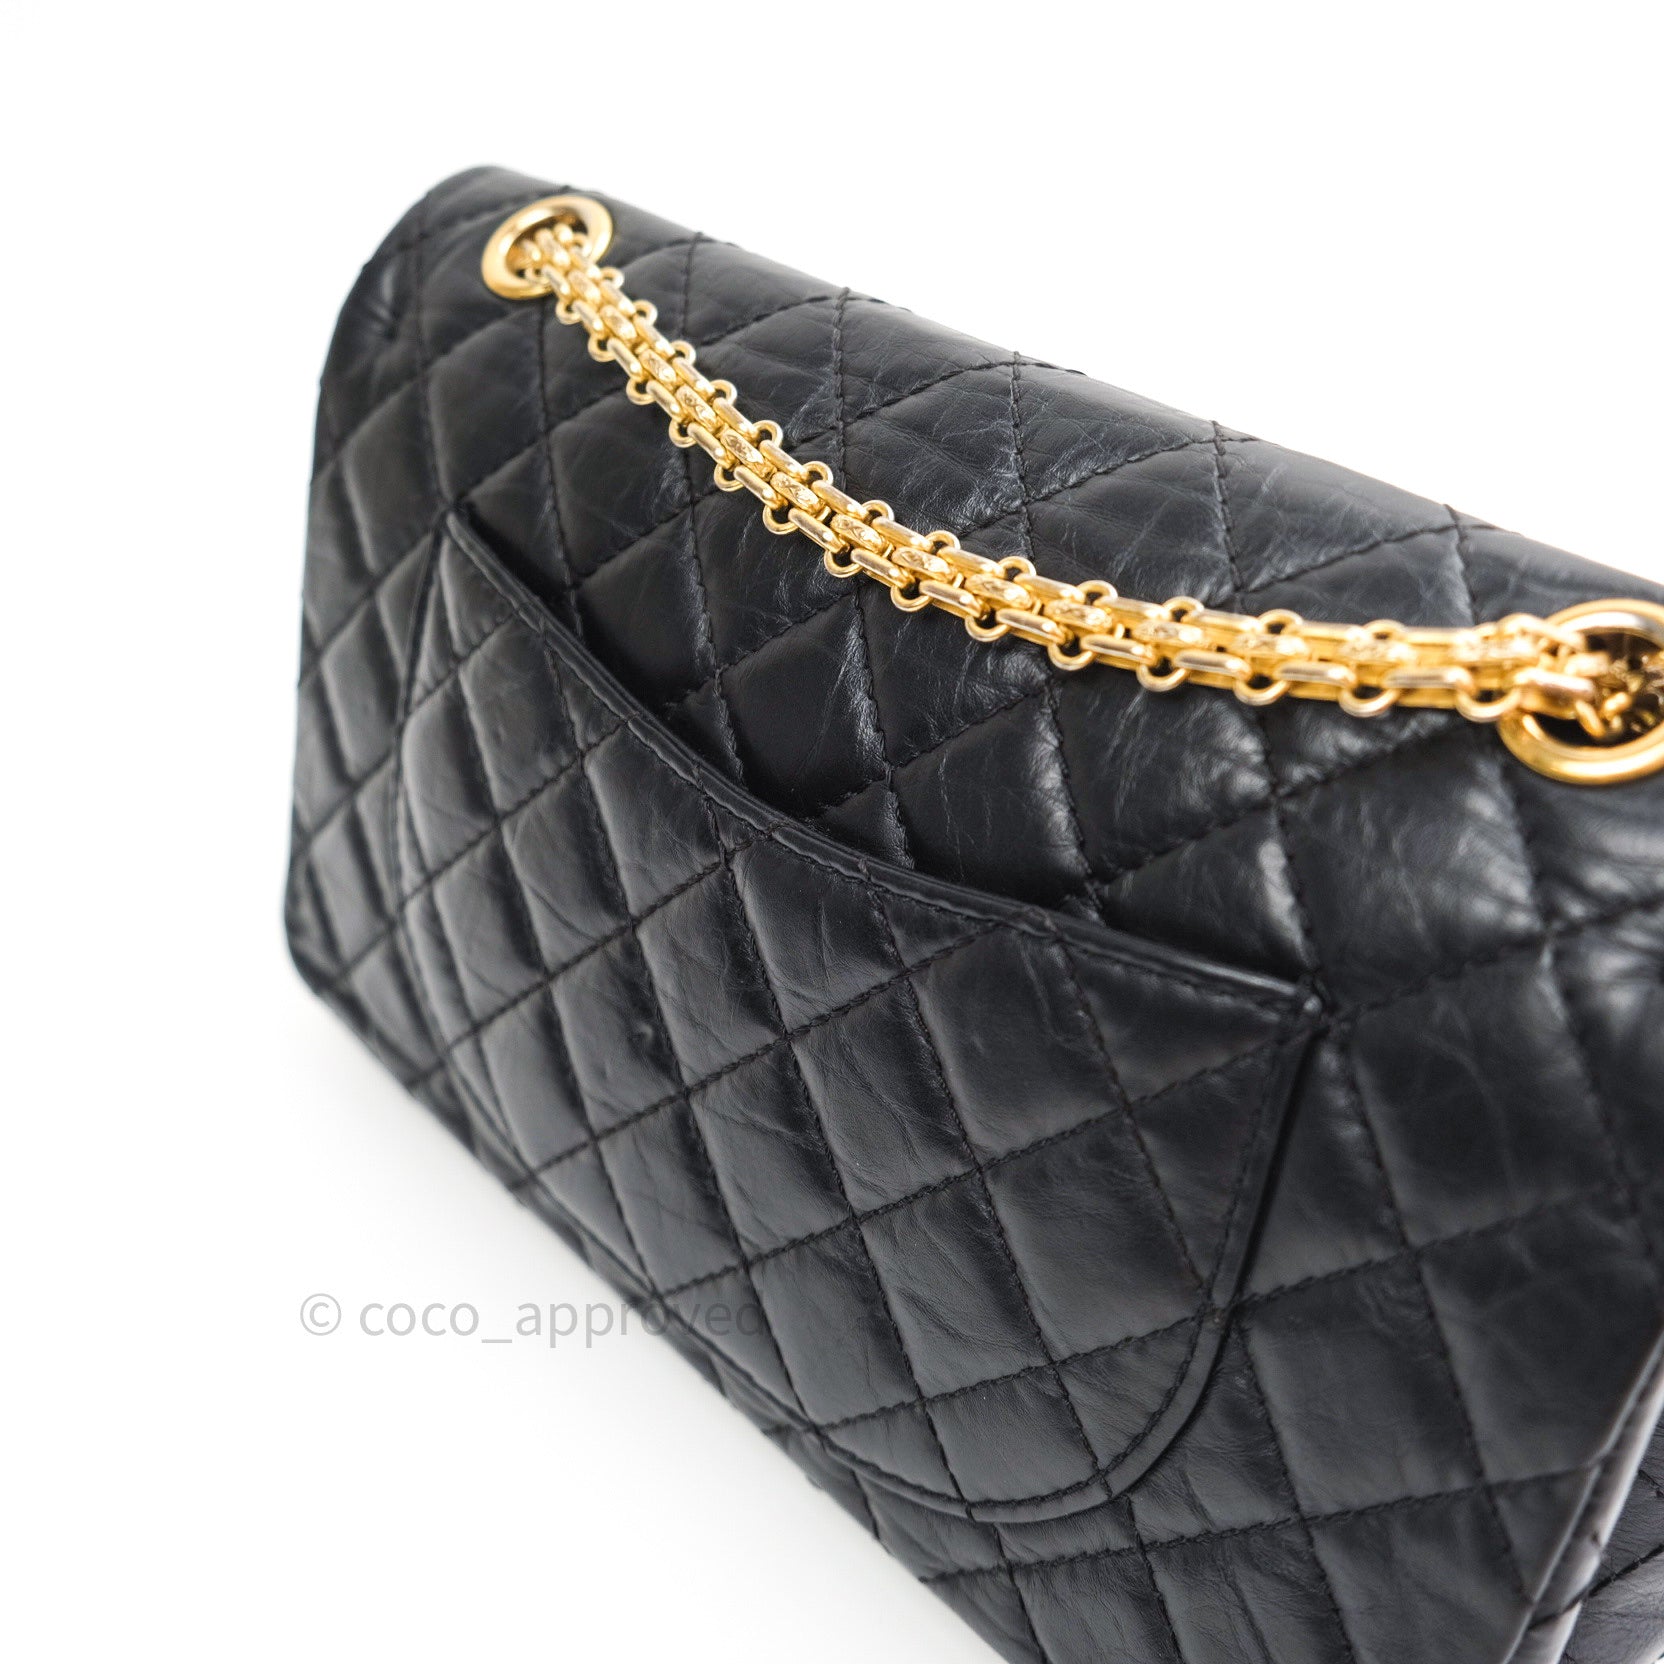 Chanel 2.55 Reissue Lucky Charms 225 Flap Iridescent Metallic Grey